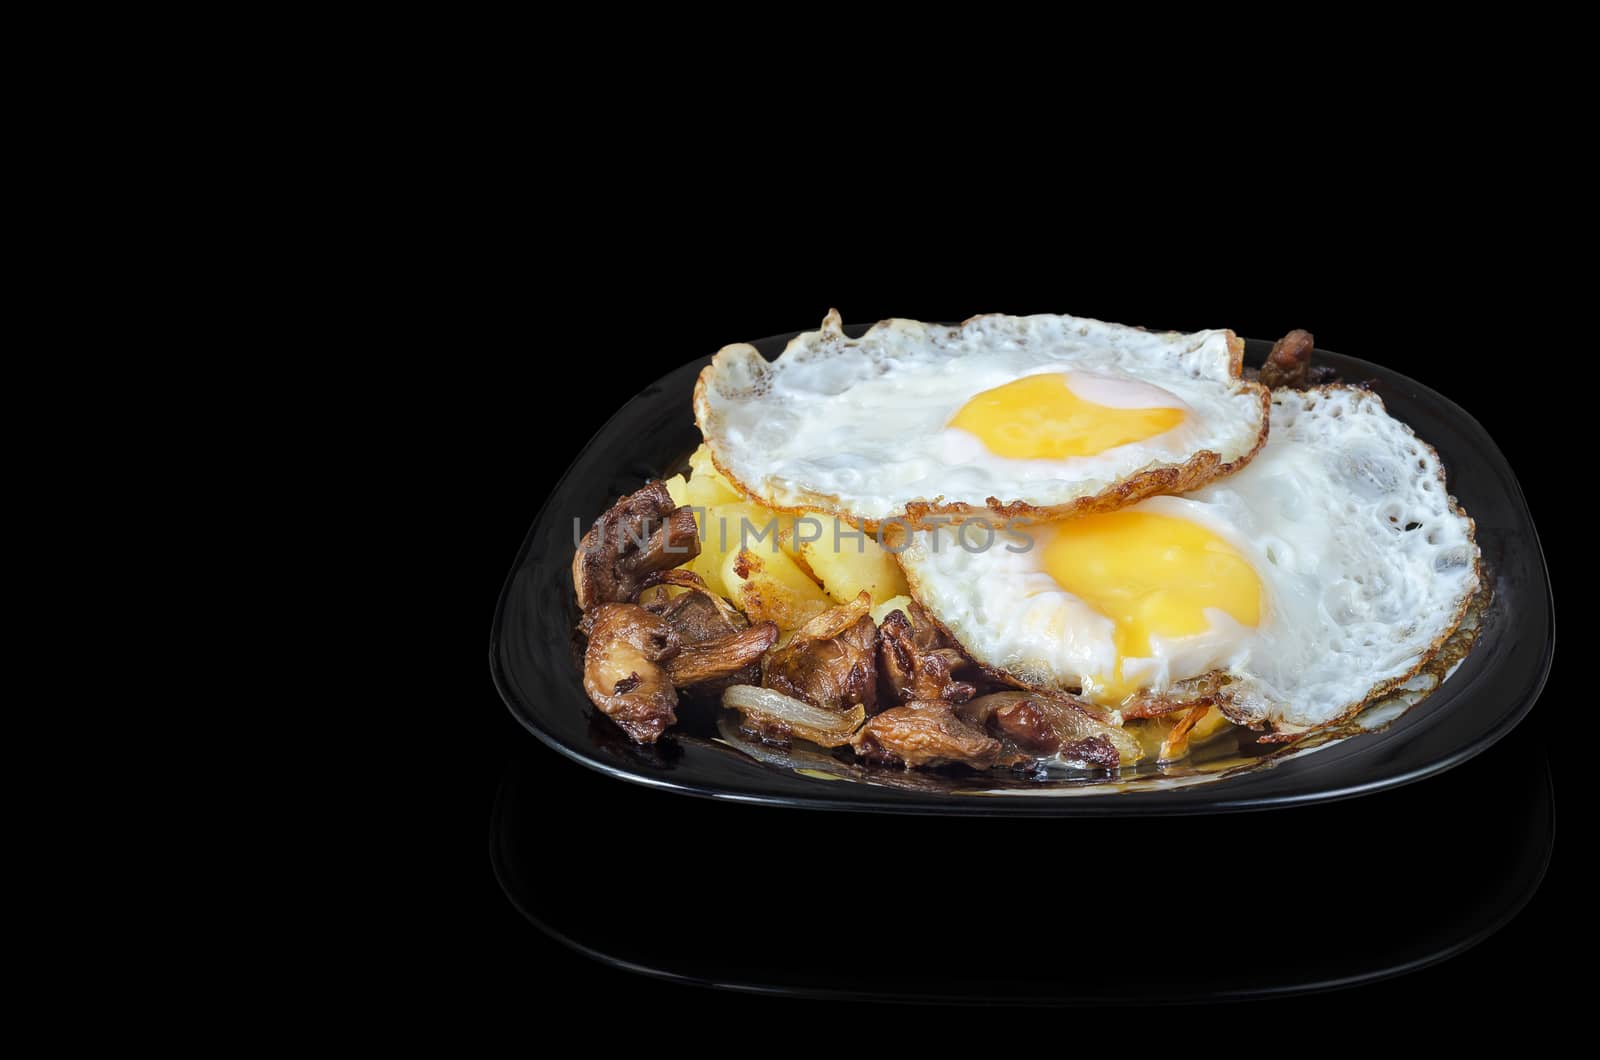 Fried eggs with potatoes and mushrooms on a black plate and a black background, with reflection.